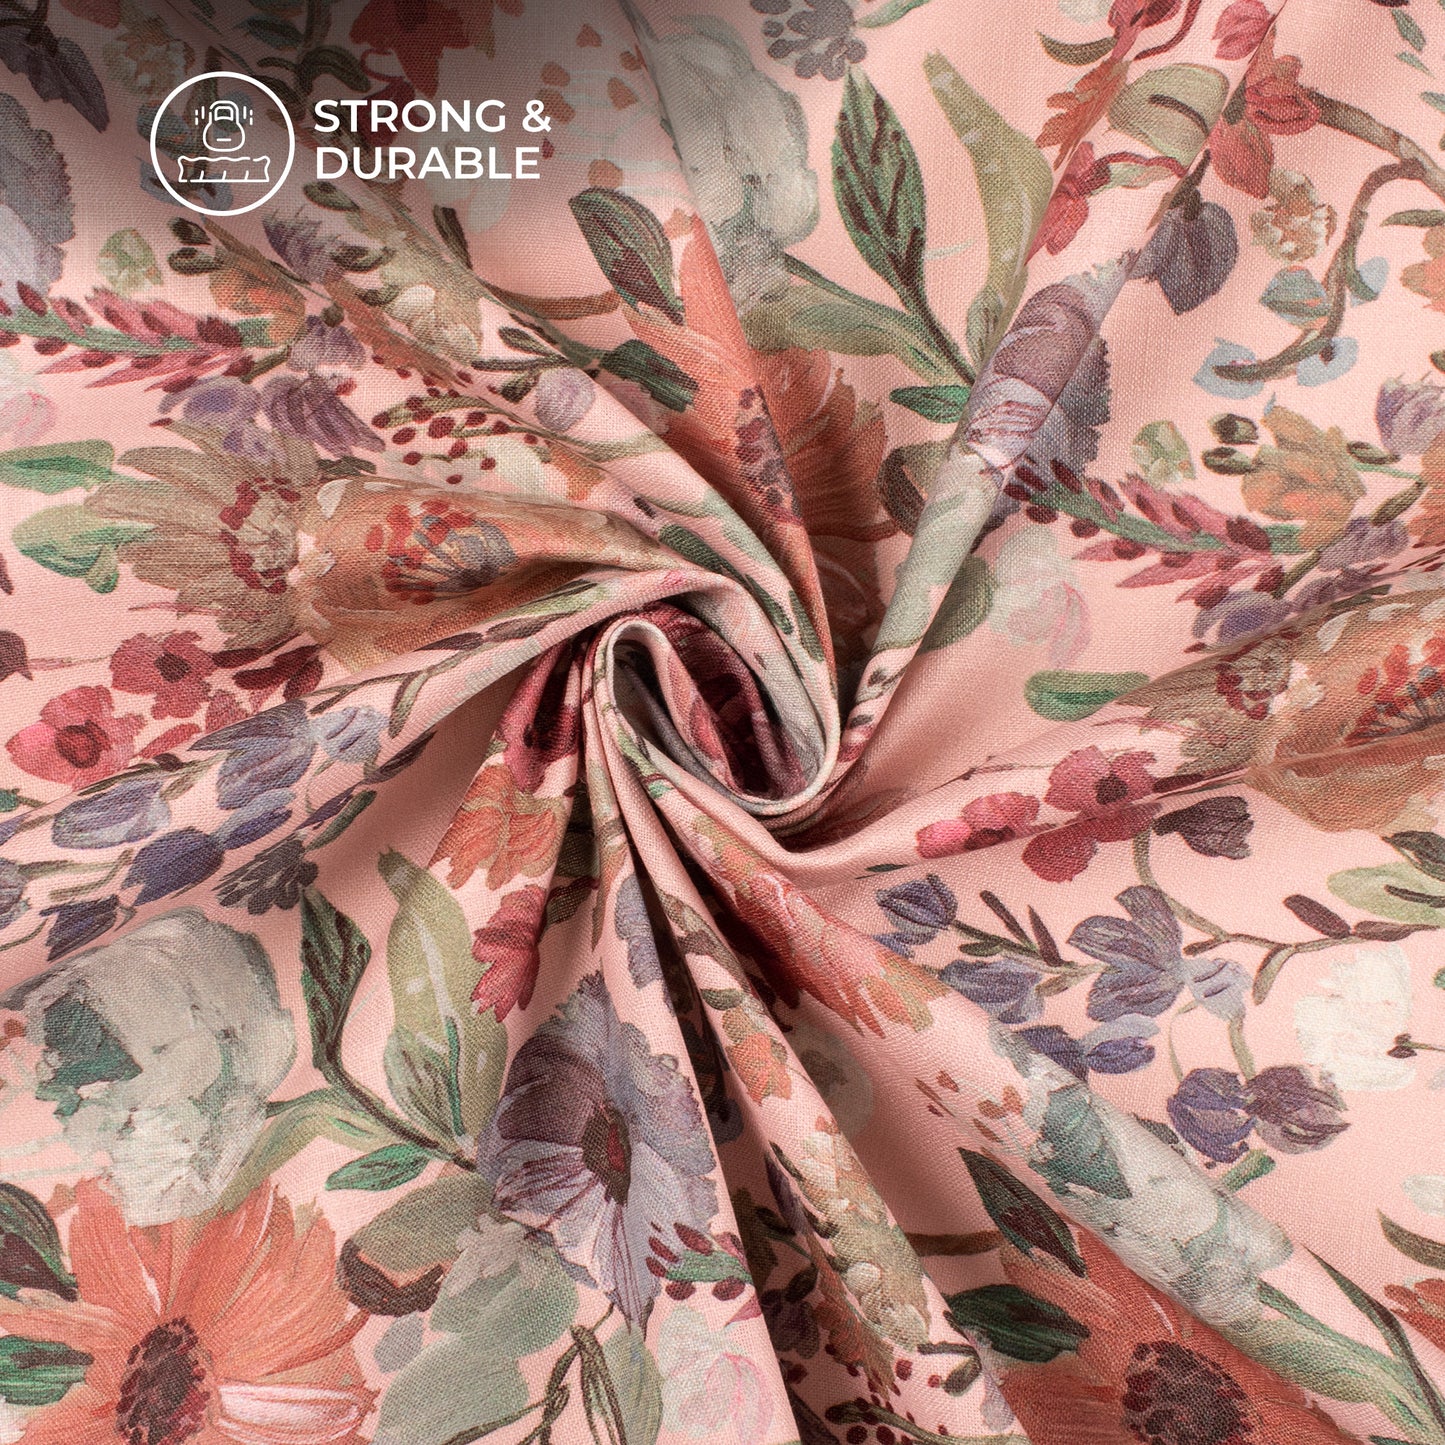 Salmon Pink Floral Digital Print Linen Textured Fabric (Width 56 Inches)